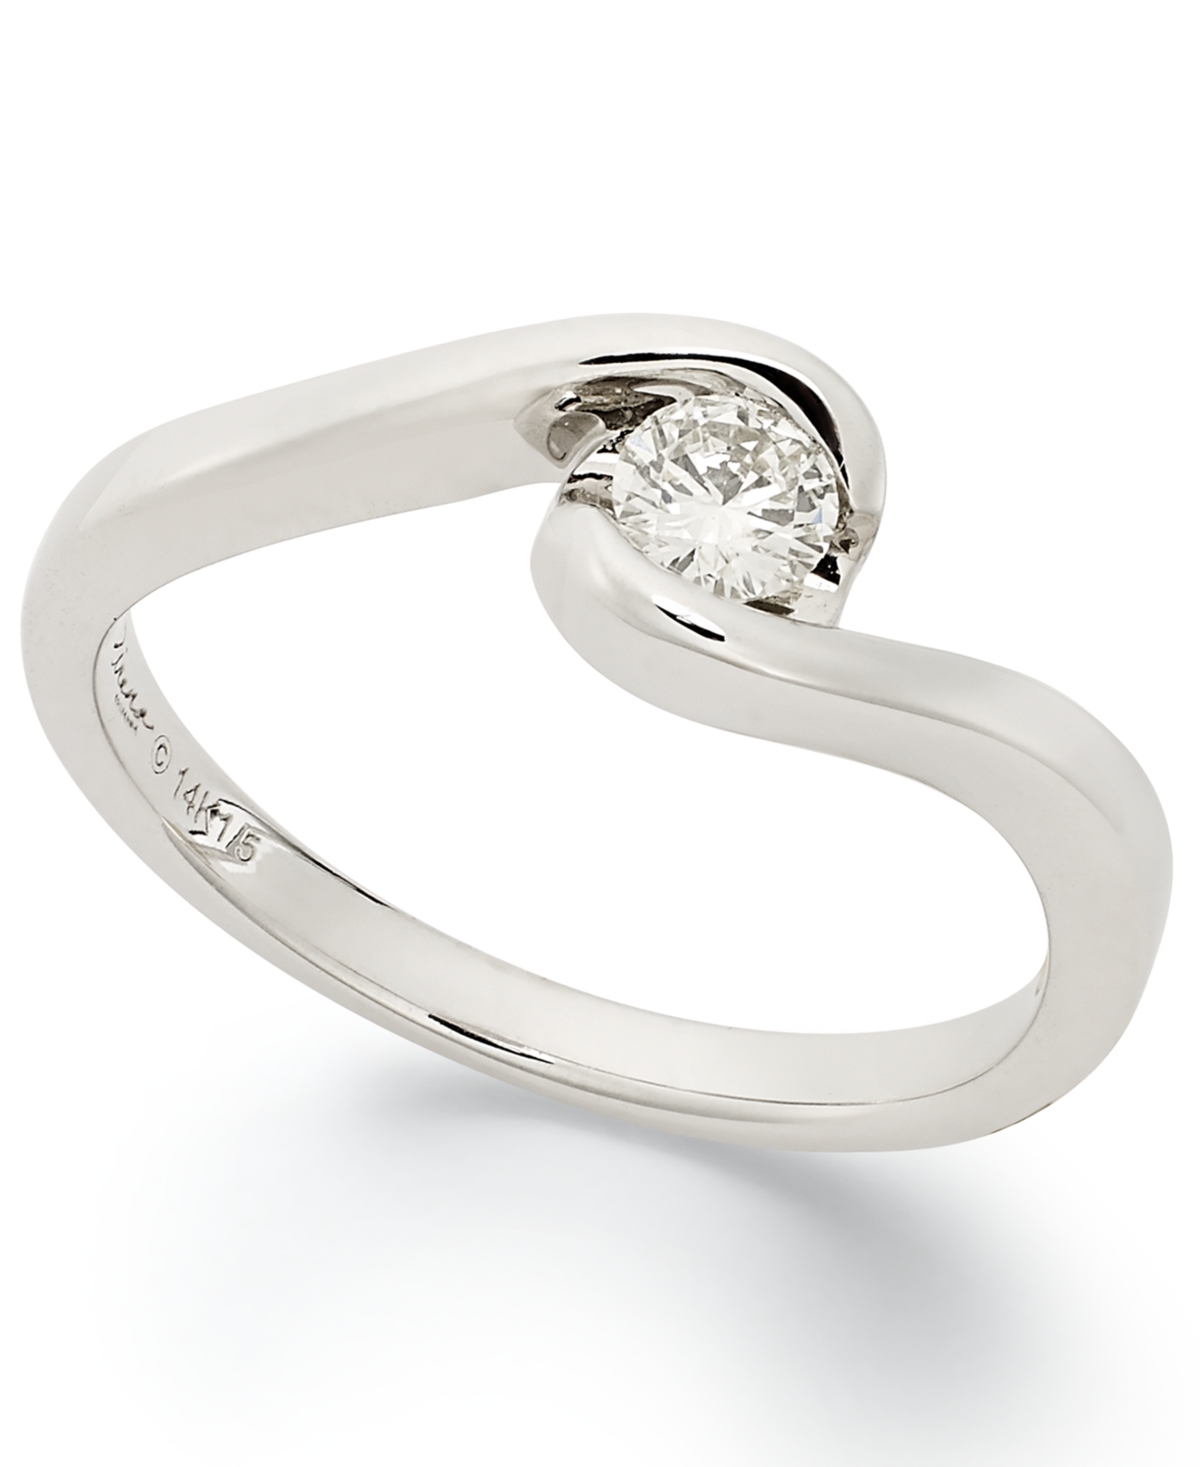 Diamond Engagement Ring (1/5 ct. t.w.) in 14k White Gold - White Gold